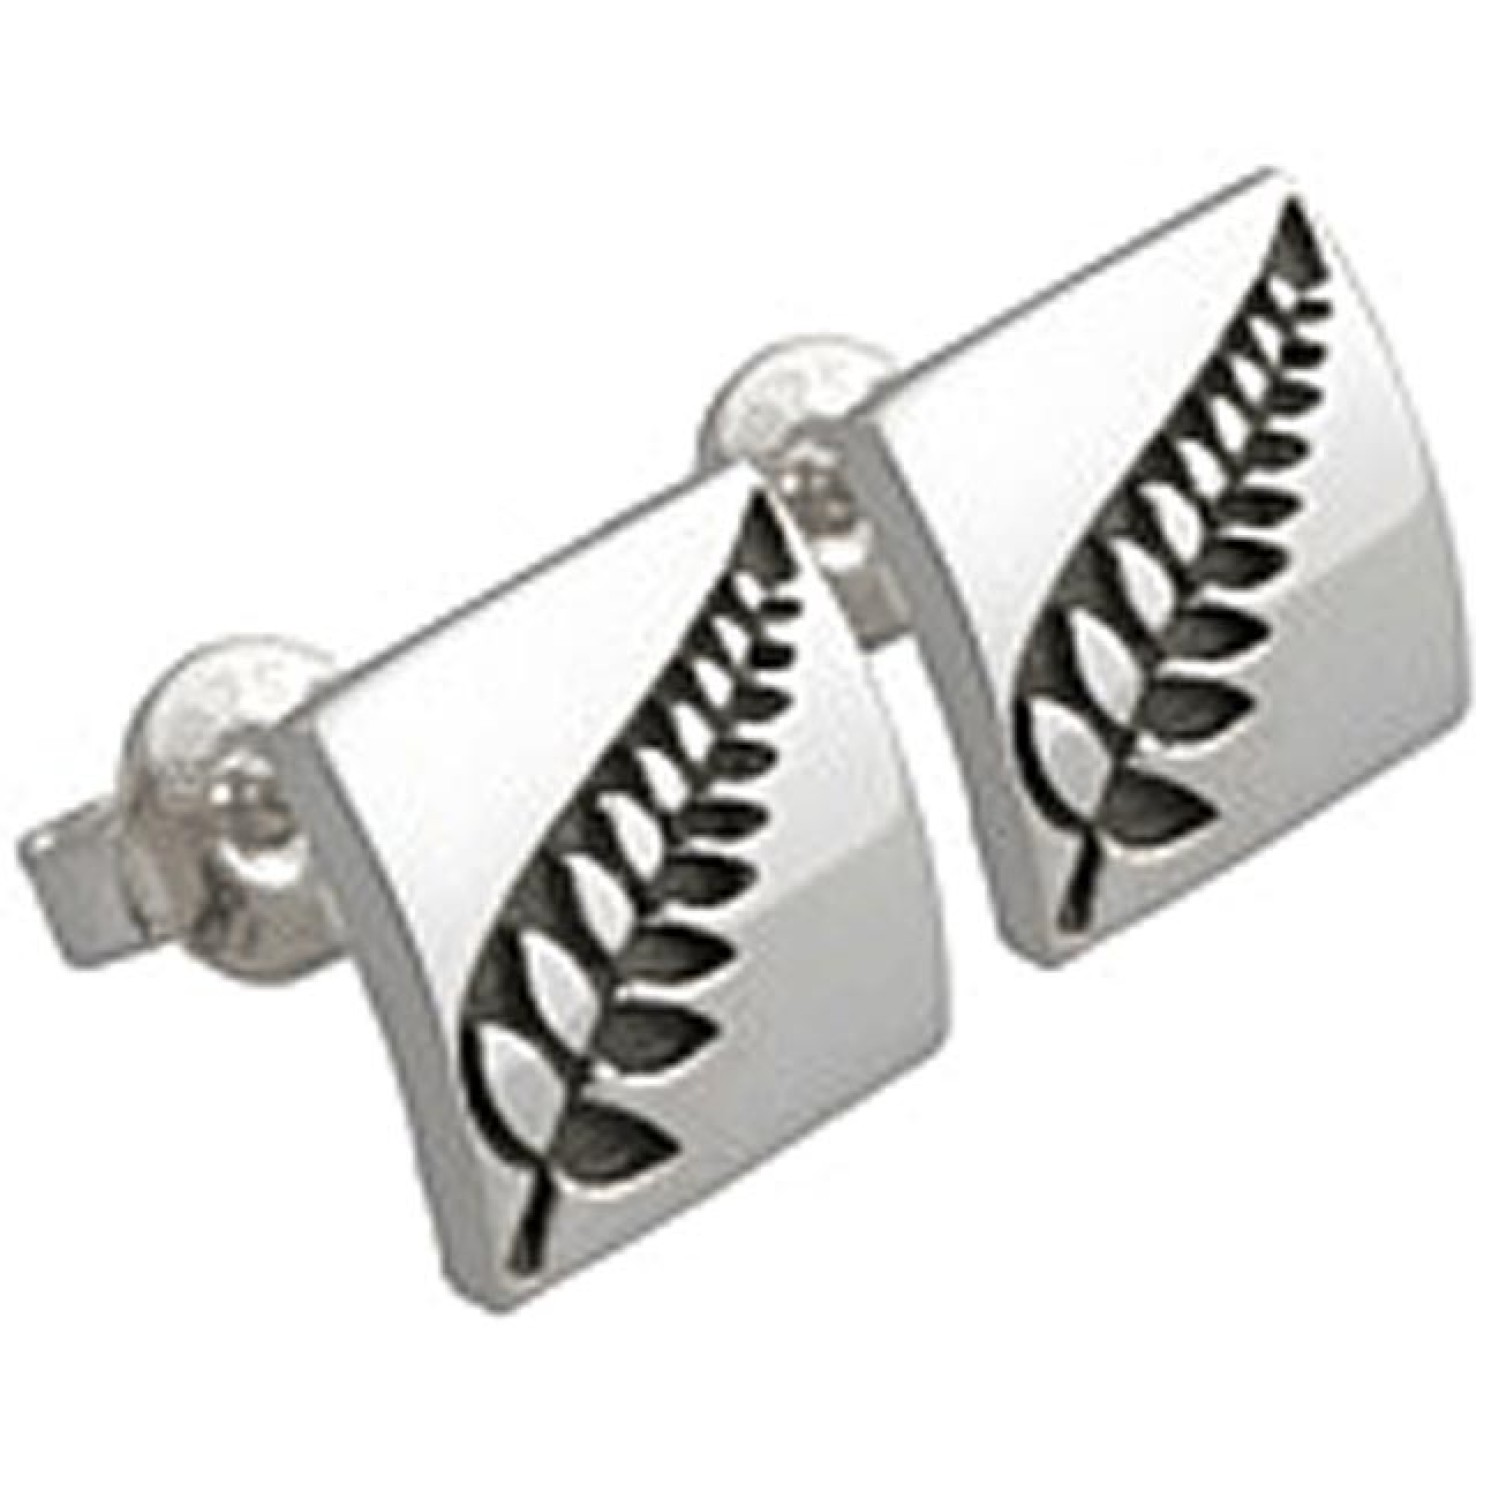 ER015 Evolve Silver NZ Silver Fern Earrings. based on the themes so well developed by Evolve in their range of new Zealand Beaded Jewellery 925 sterling silver including butterfly Stud fitting Gift Boxed 5 year written guarentee @christies.online